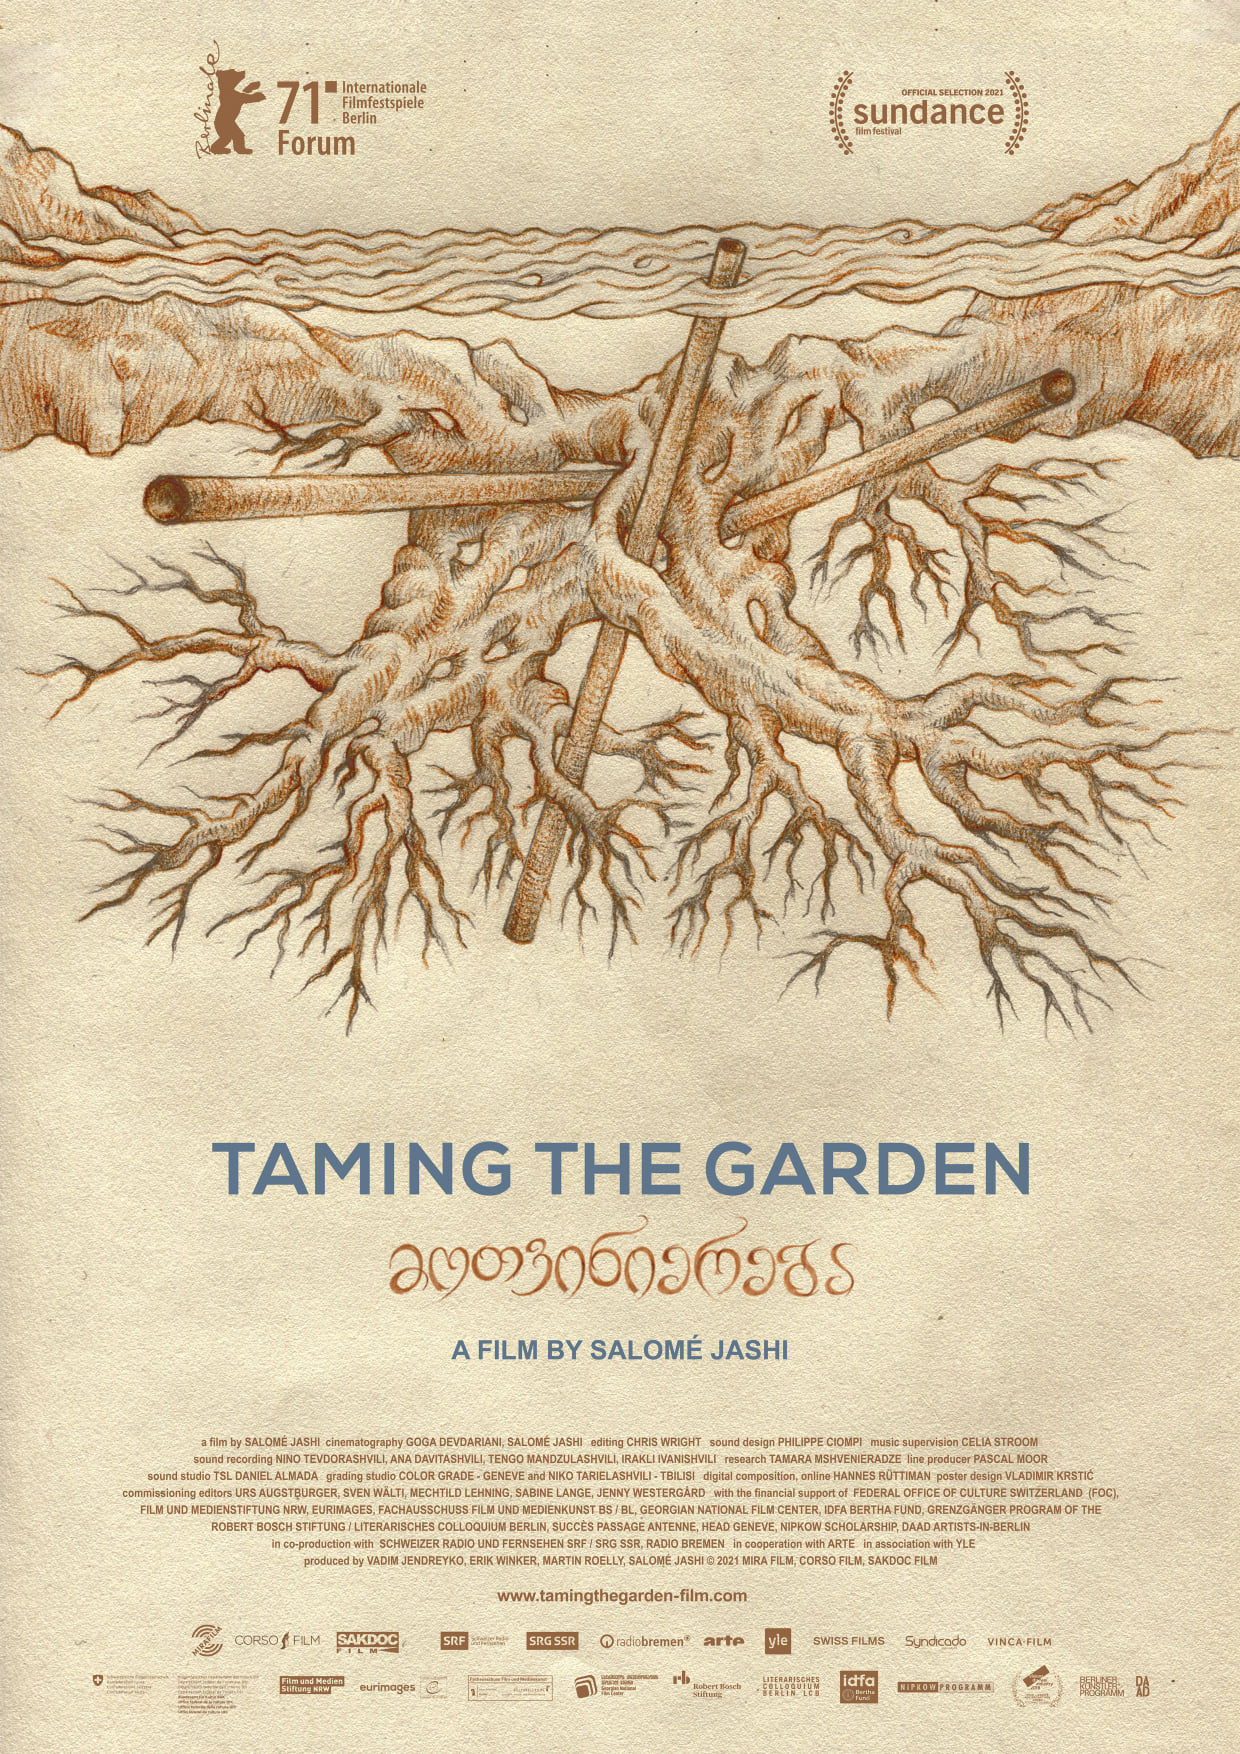 the poster of the film